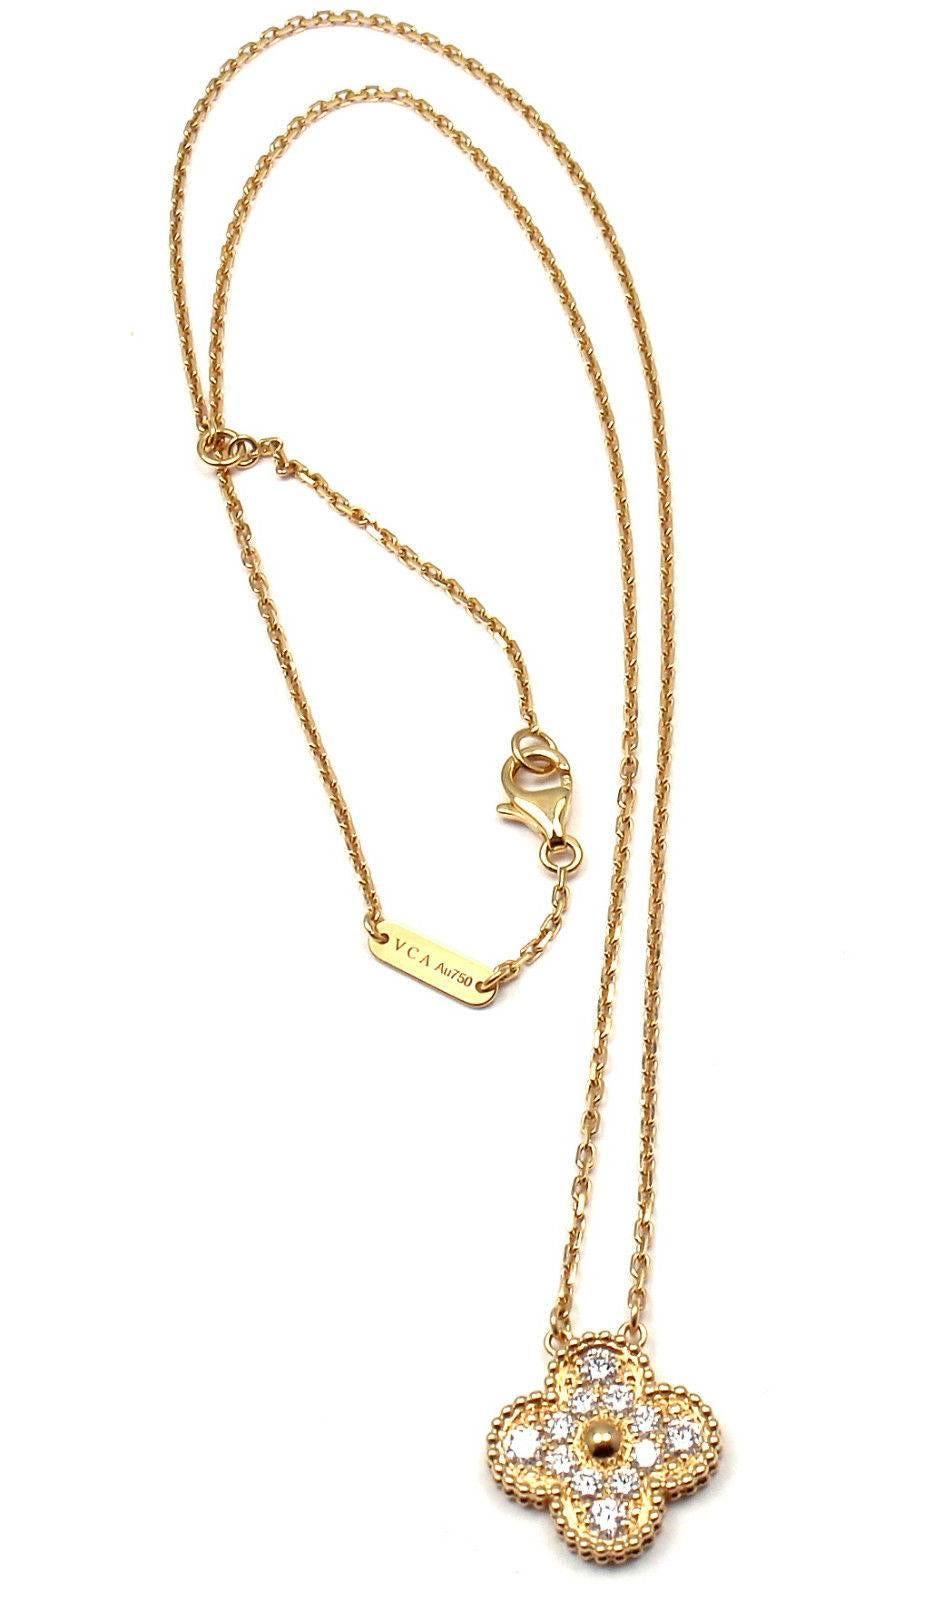 18k Yellow Gold Diamond Alhambra Pendant Necklace by Van Cleef & Arpels.
With 12 brilliant round cut diamonds VVS1 clarity, E color
Total weight .50ctw
This necklace comes with original VCA certificate and a VCA box.

Details:
18'' necklace,